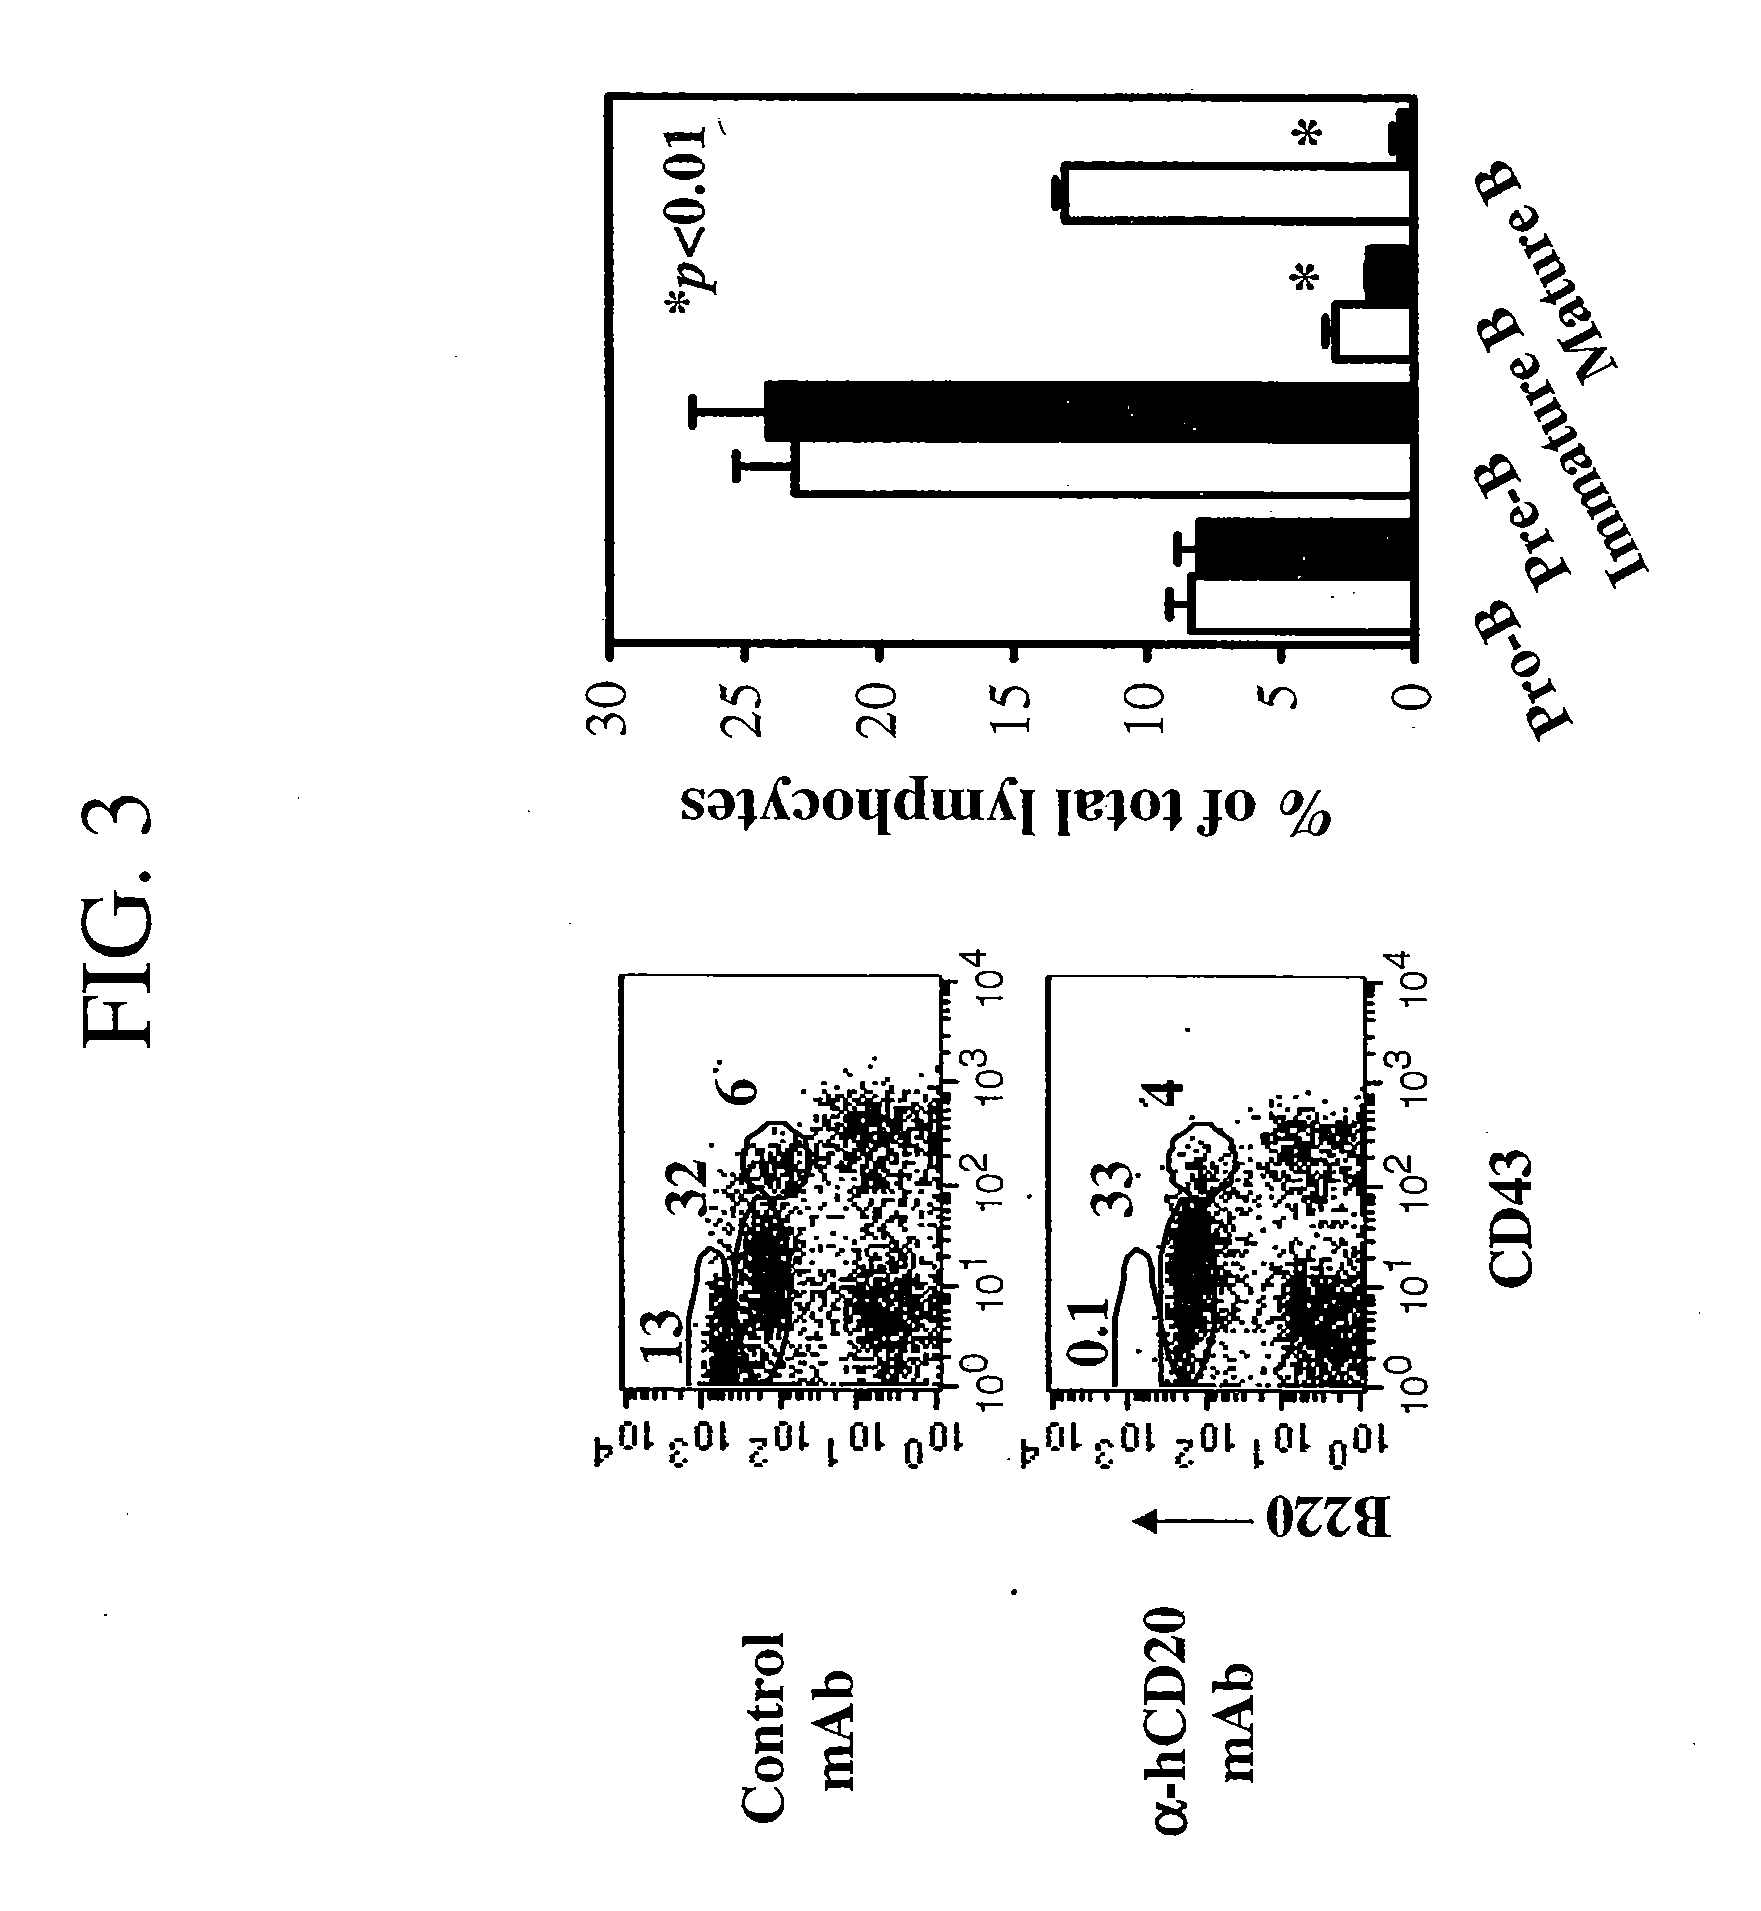 Method for Augmenting B Cell Depletion